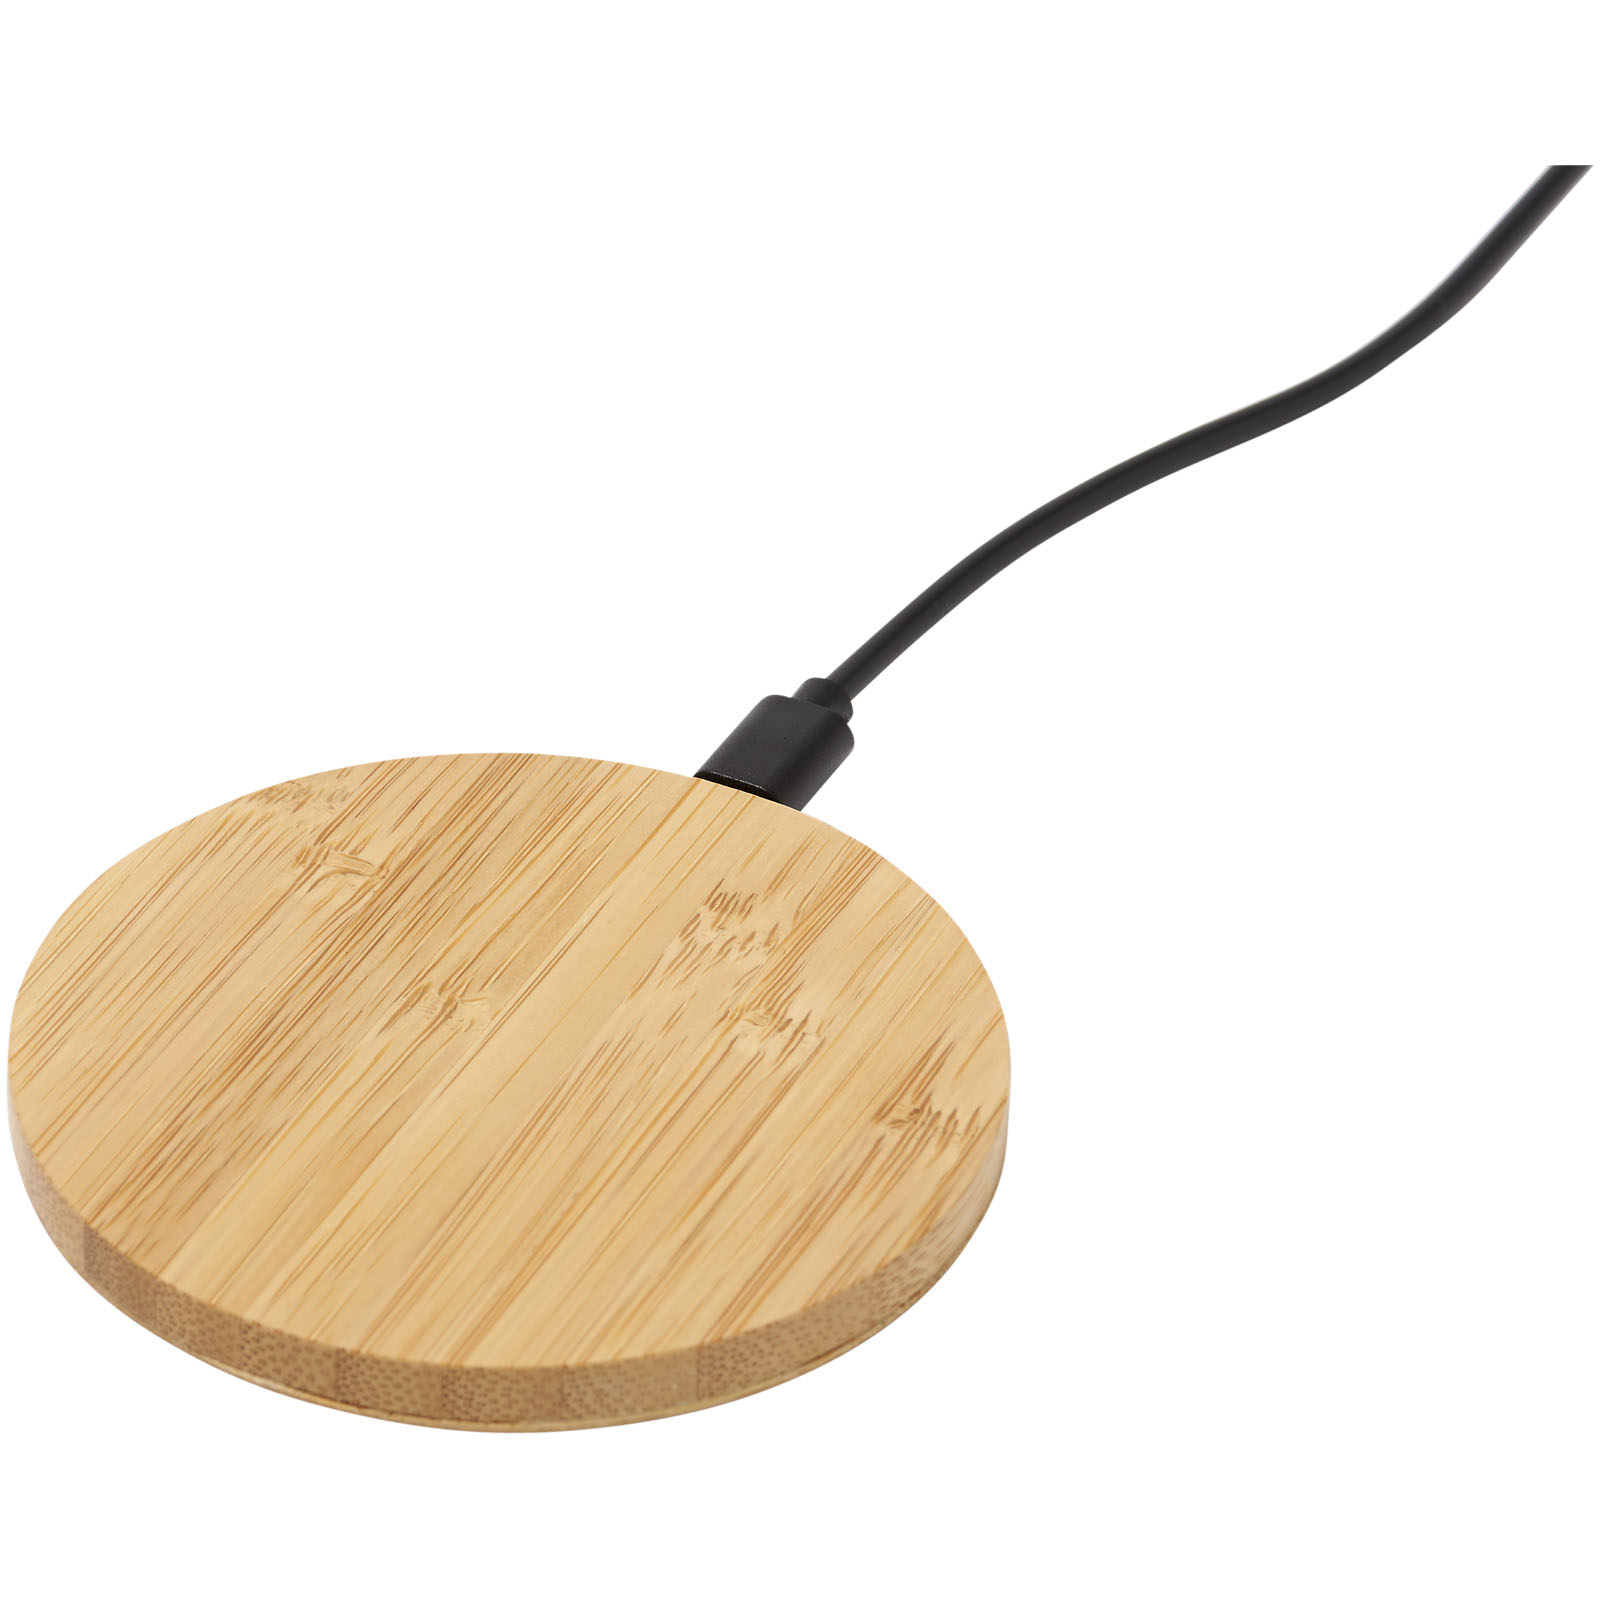 Advertising Telephone & Tablet Accessories - Essence 5W bamboo wireless charging pad - 4